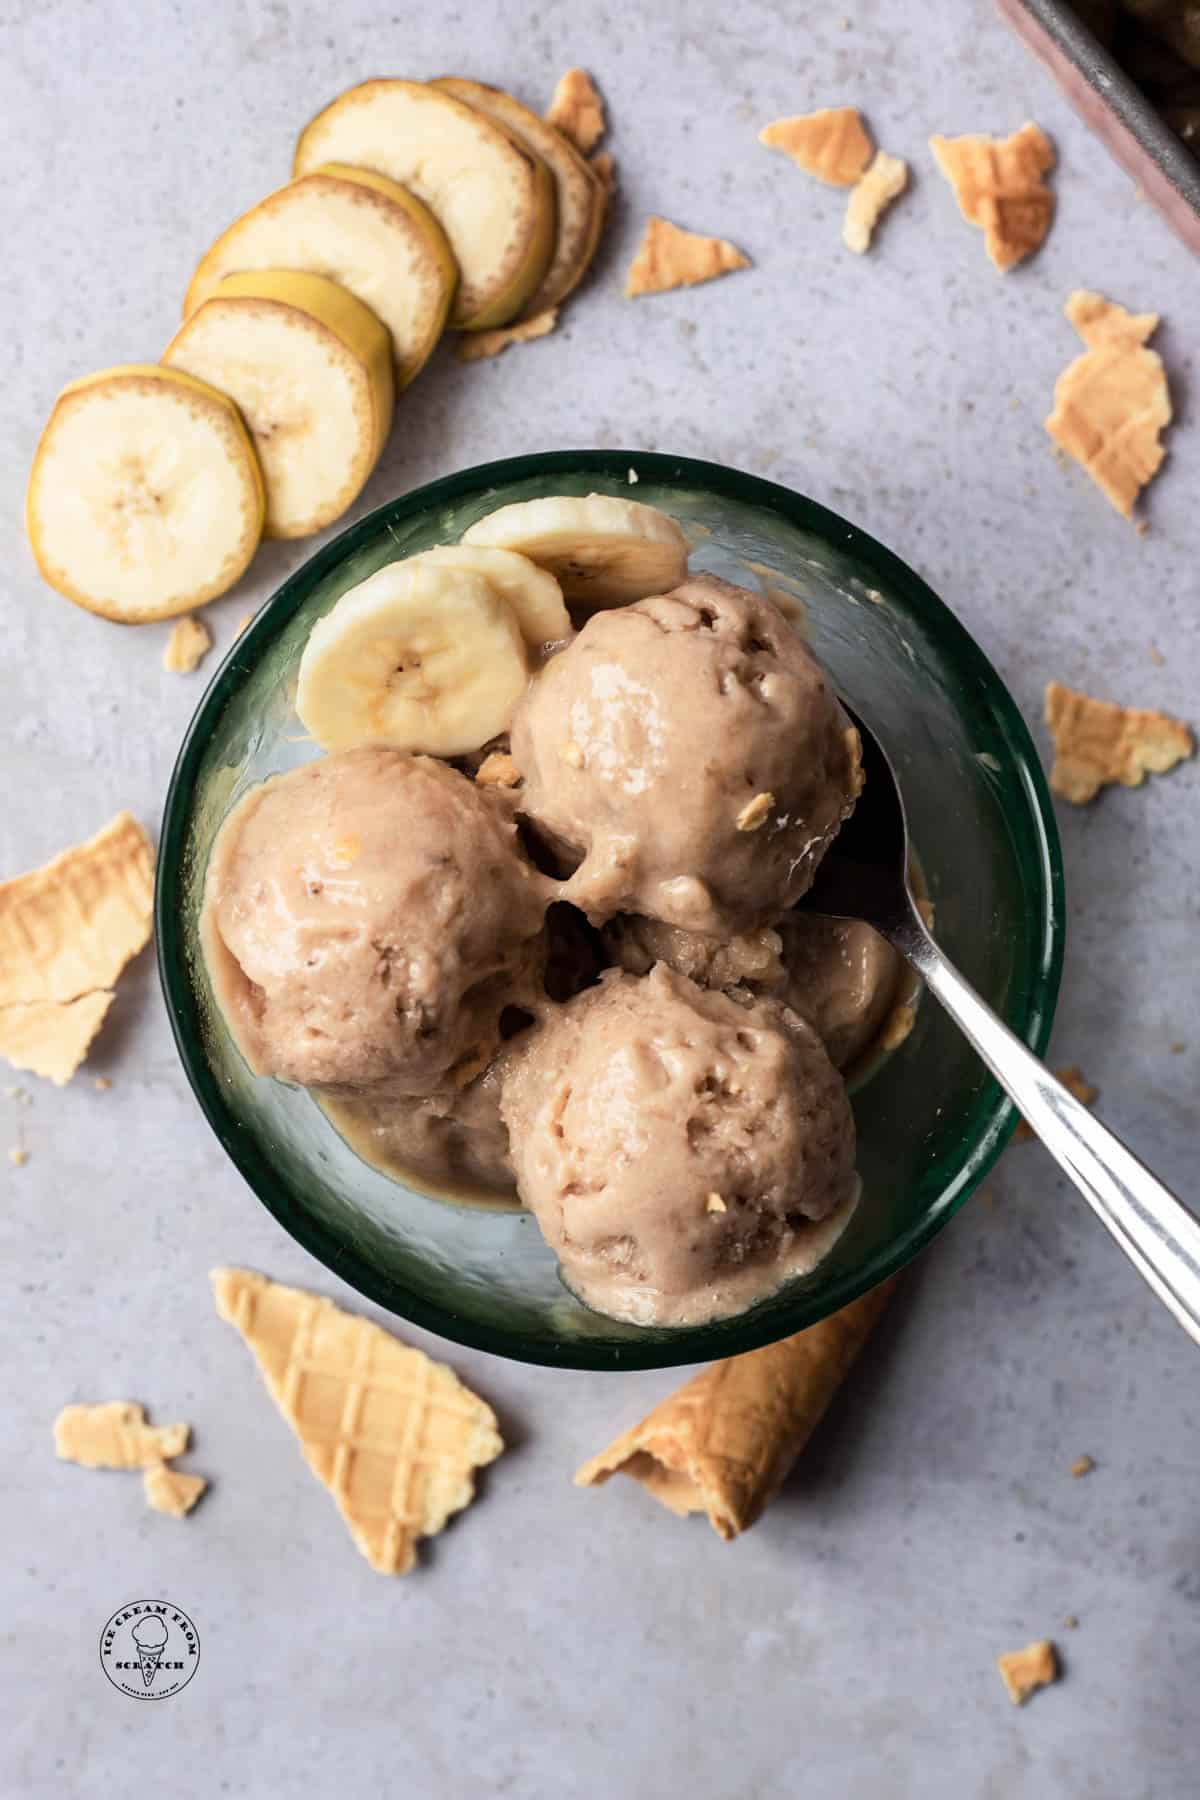 Scoops of banana ice cream (aka nice cream) in a glass bowl, viewed from overhead. Around the bowl are sliced bananas and pieces of ice cream cones.